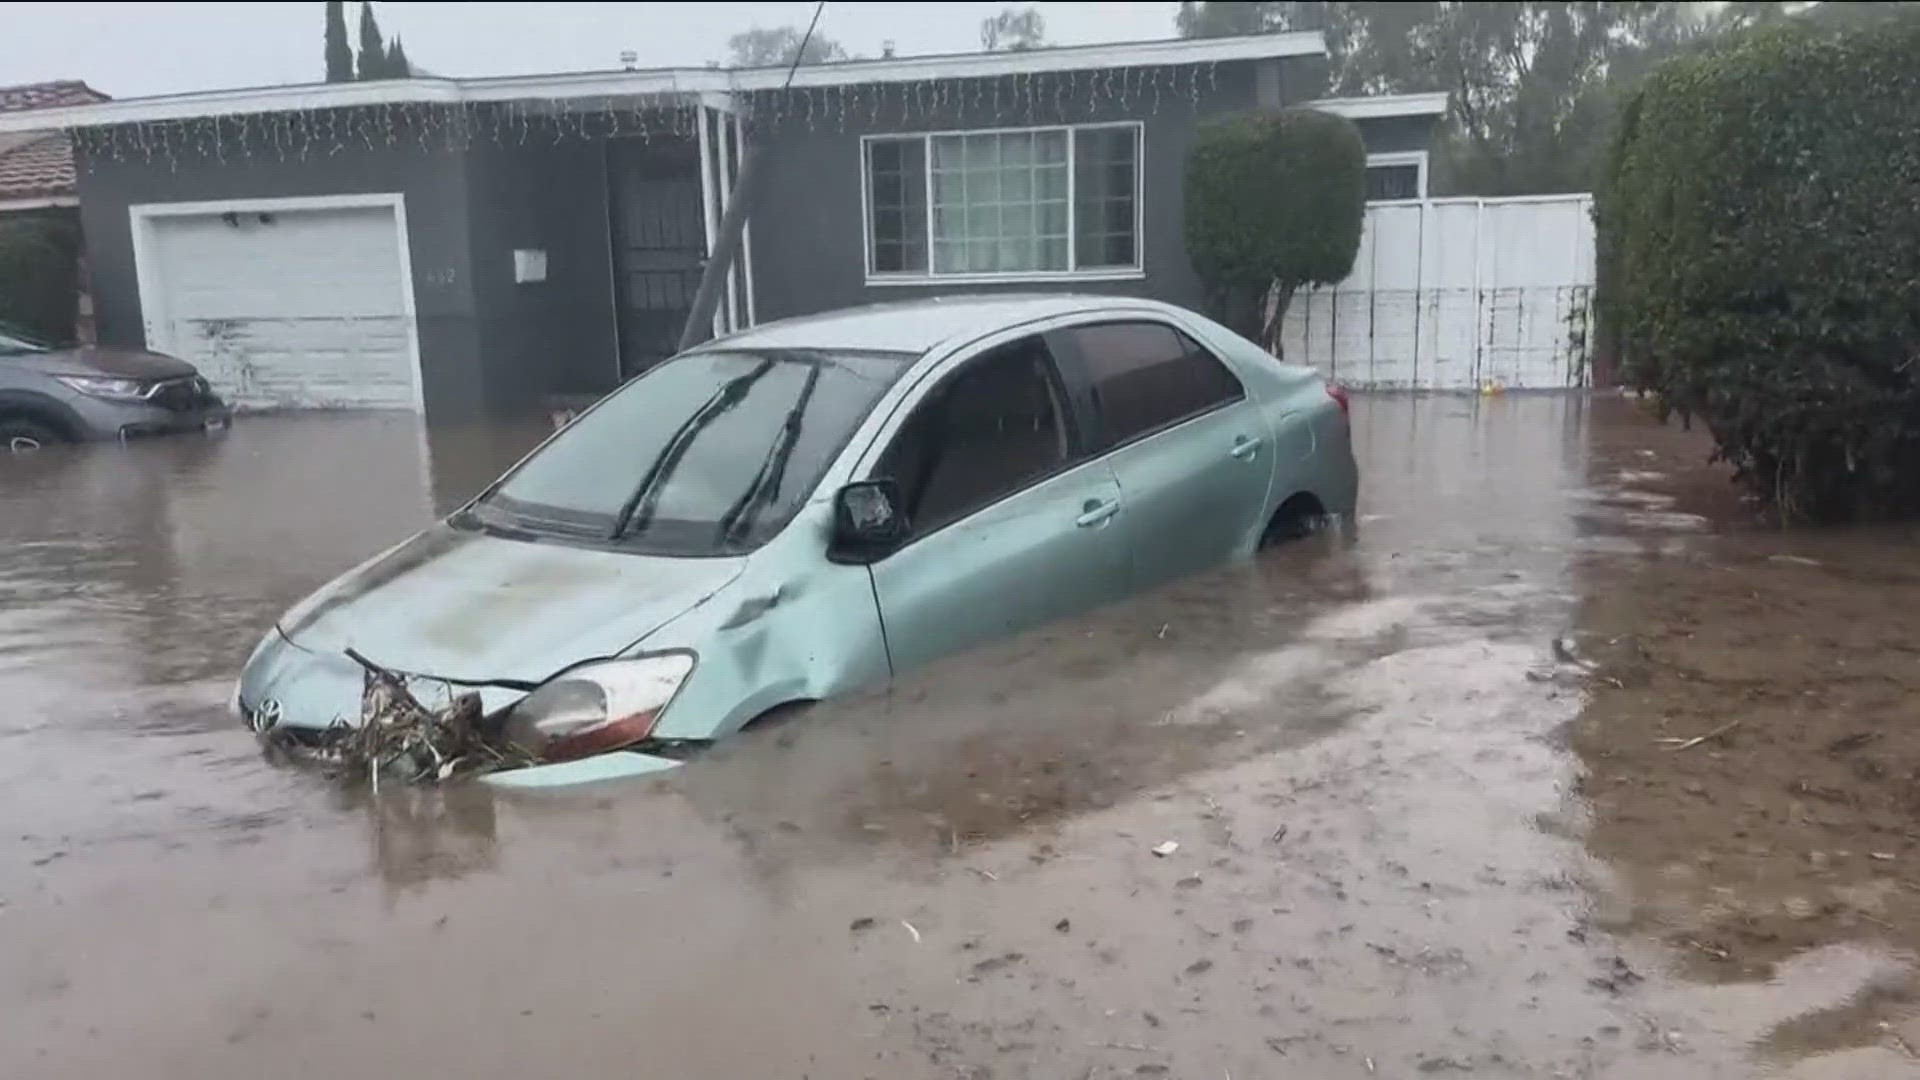 Cars floated away in San Diego County on Monday when heavy rain turned roads into rivers.